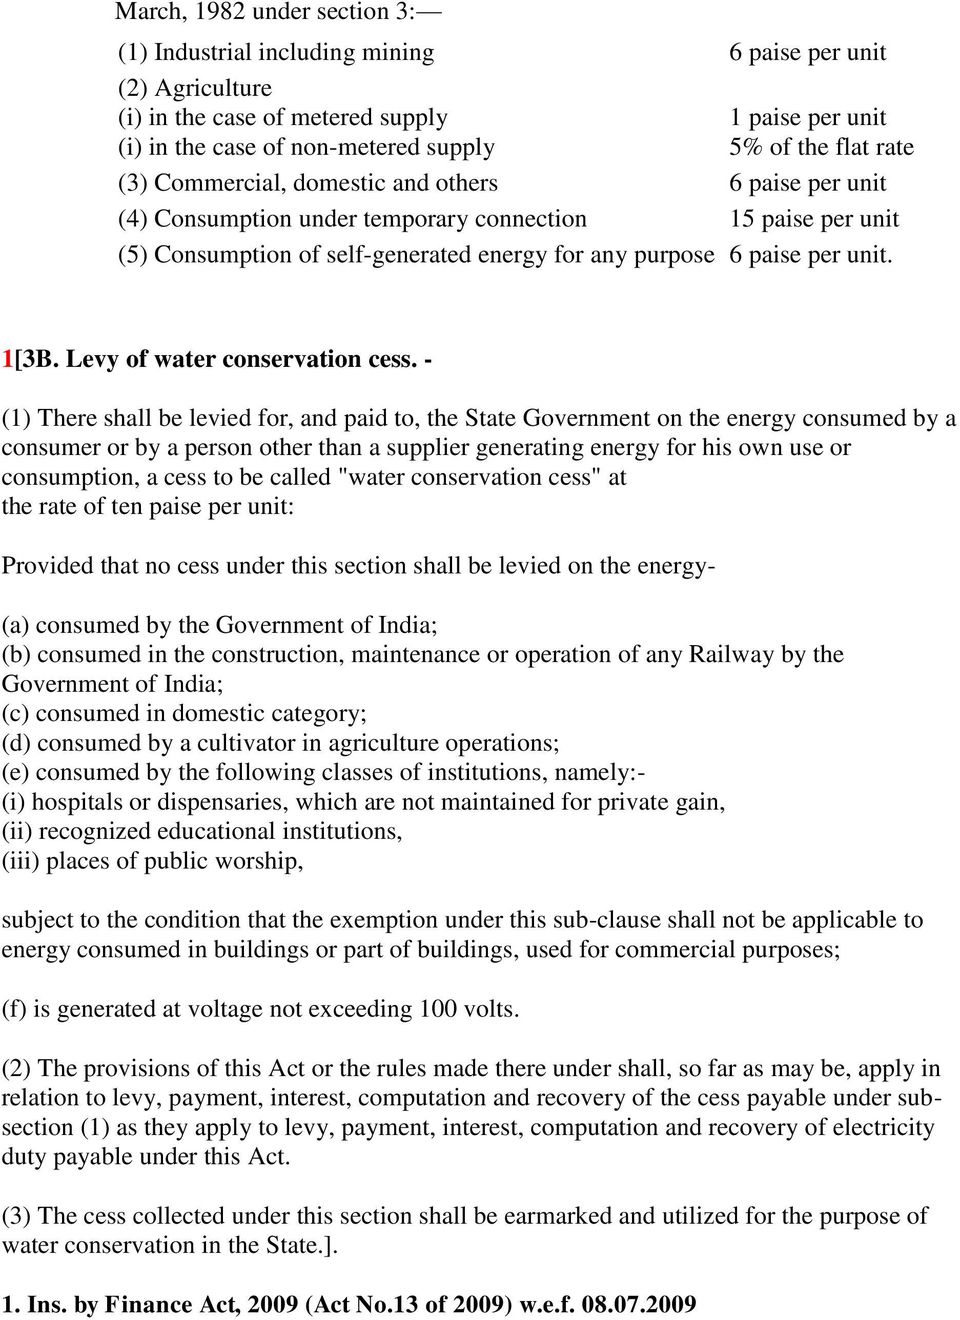 Levy of water conservation cess.